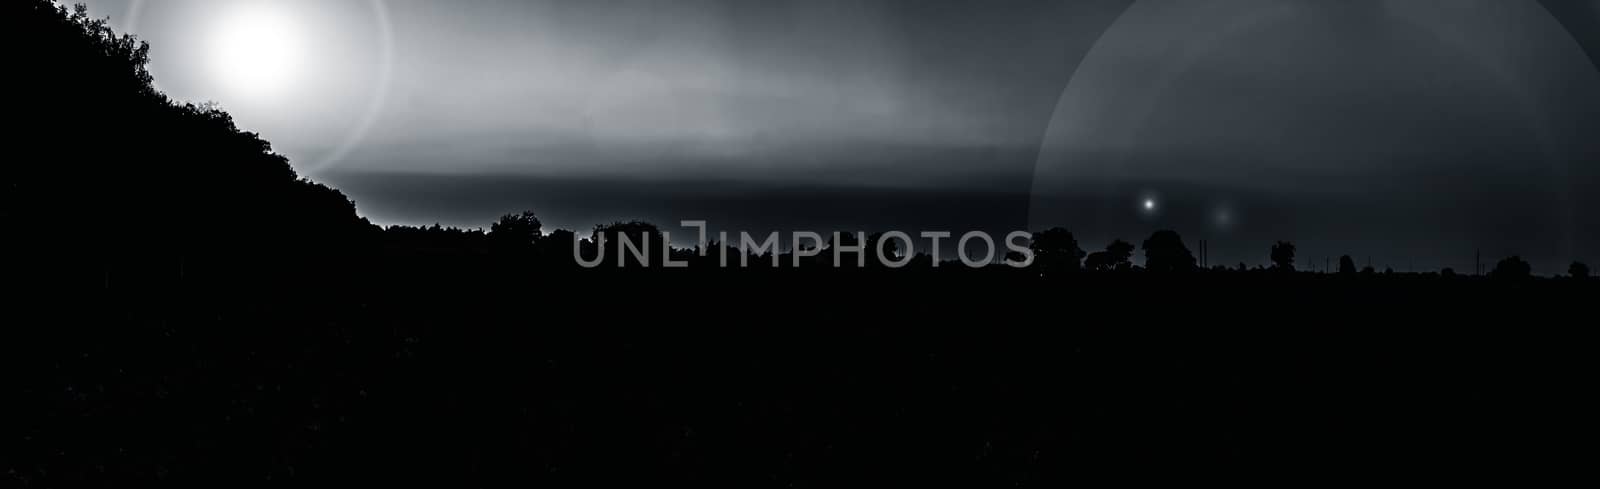 Panorama shot of sunset or sunrise through clouds and mountains and trees in the deep forest.